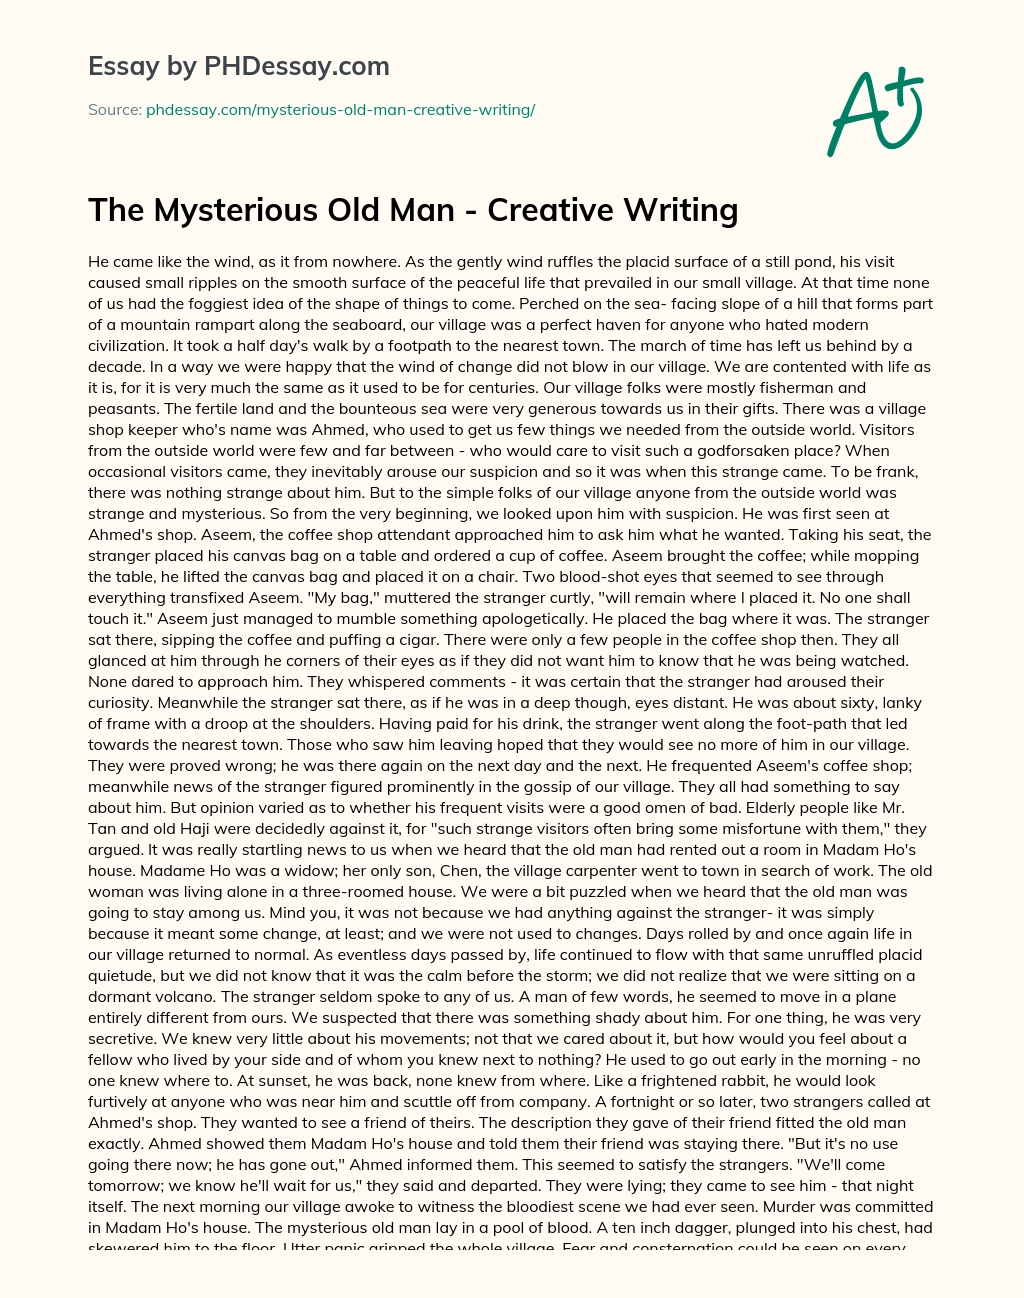 The Mysterious Old Man – Creative Writing essay